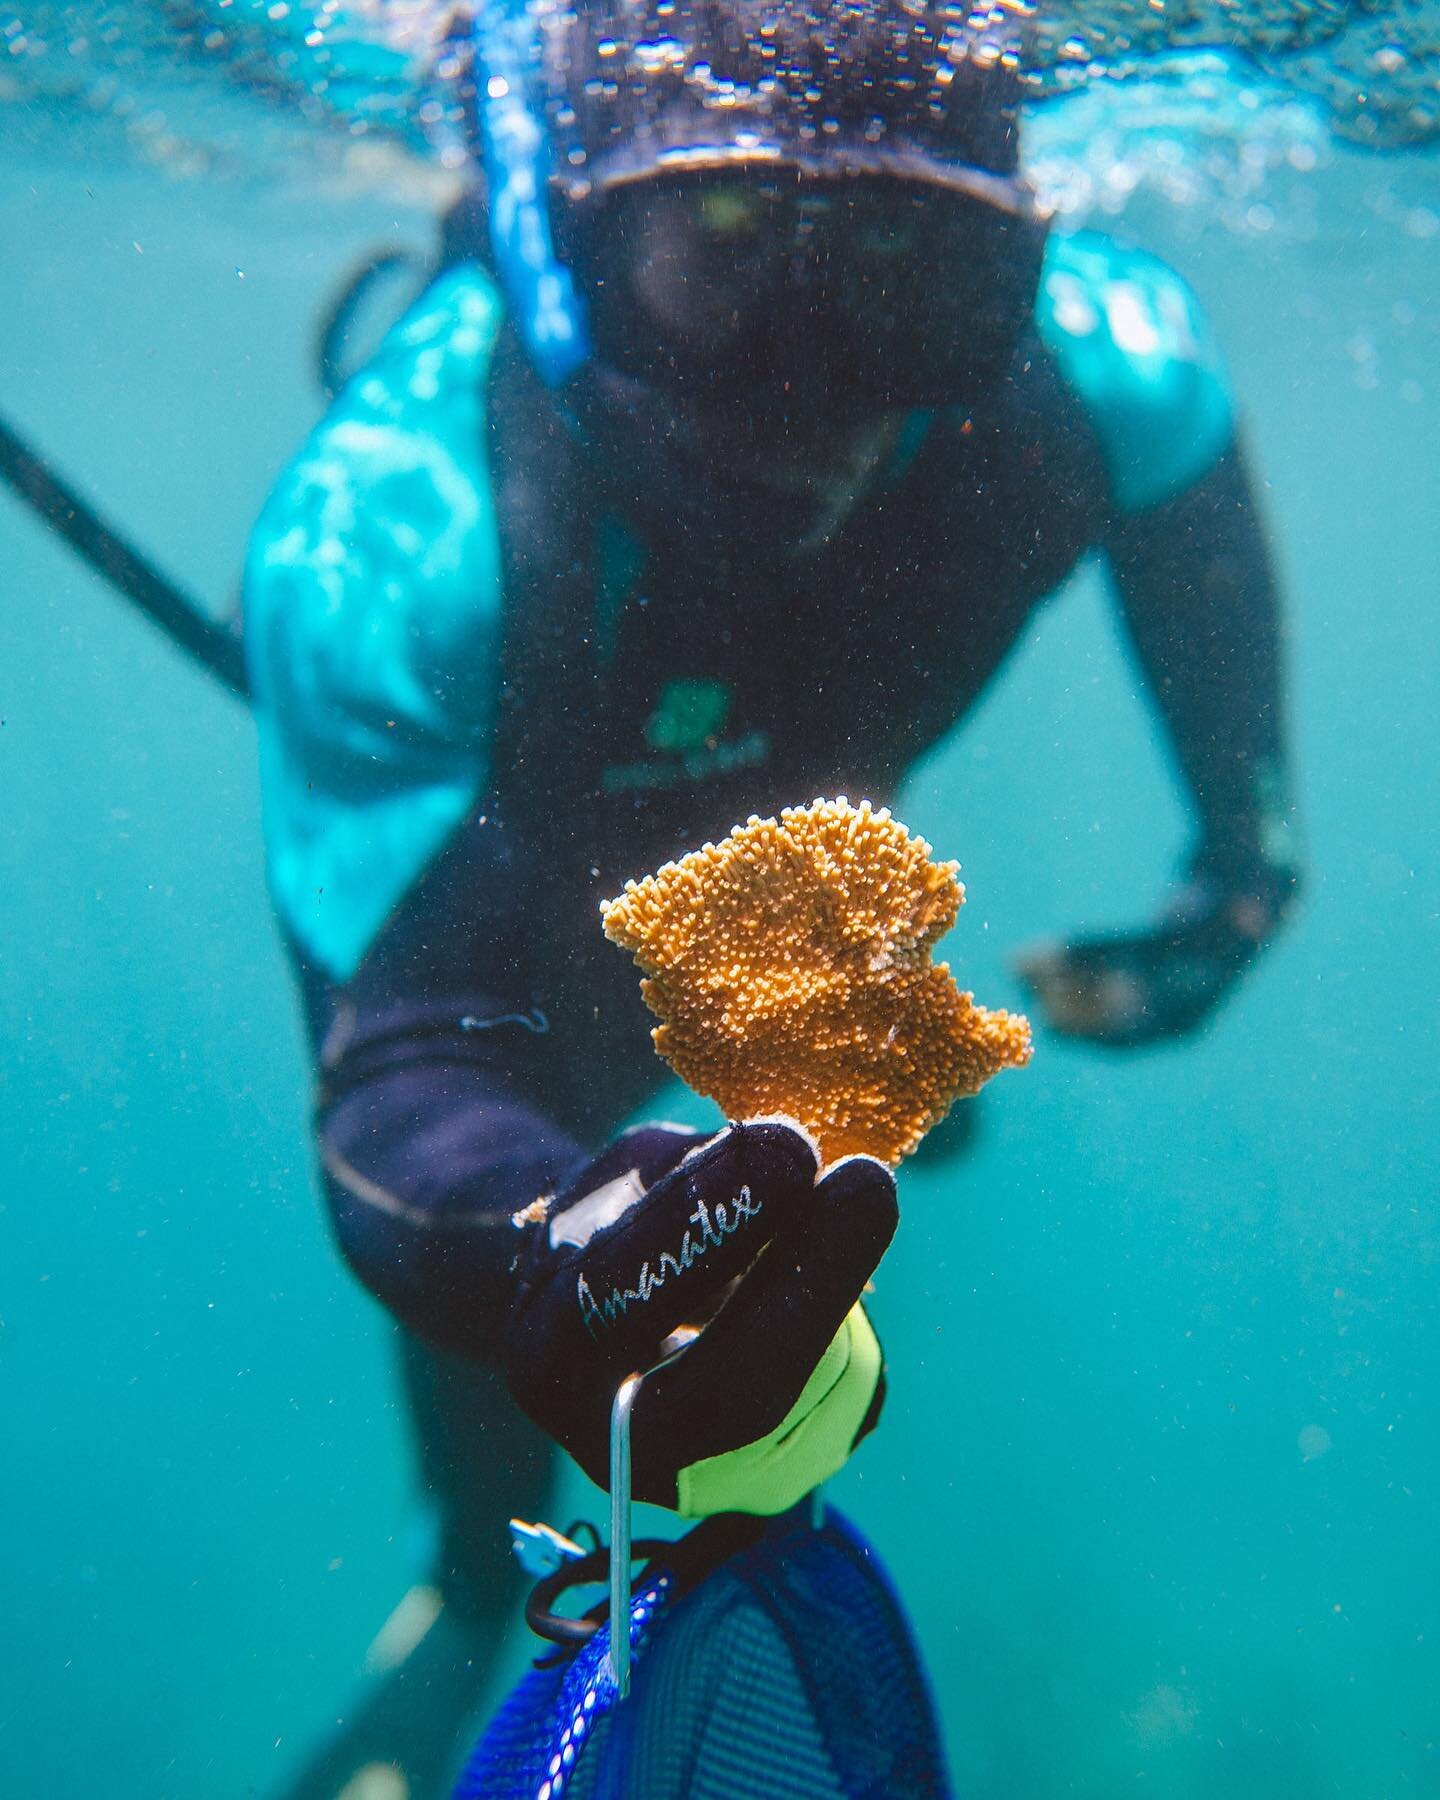 When collecting coral fragments, we only take up to 10% of the coral colony. This ensures the #coral can fully recover and continue to provide critical habitat structure to marine life.  #reefrestoration